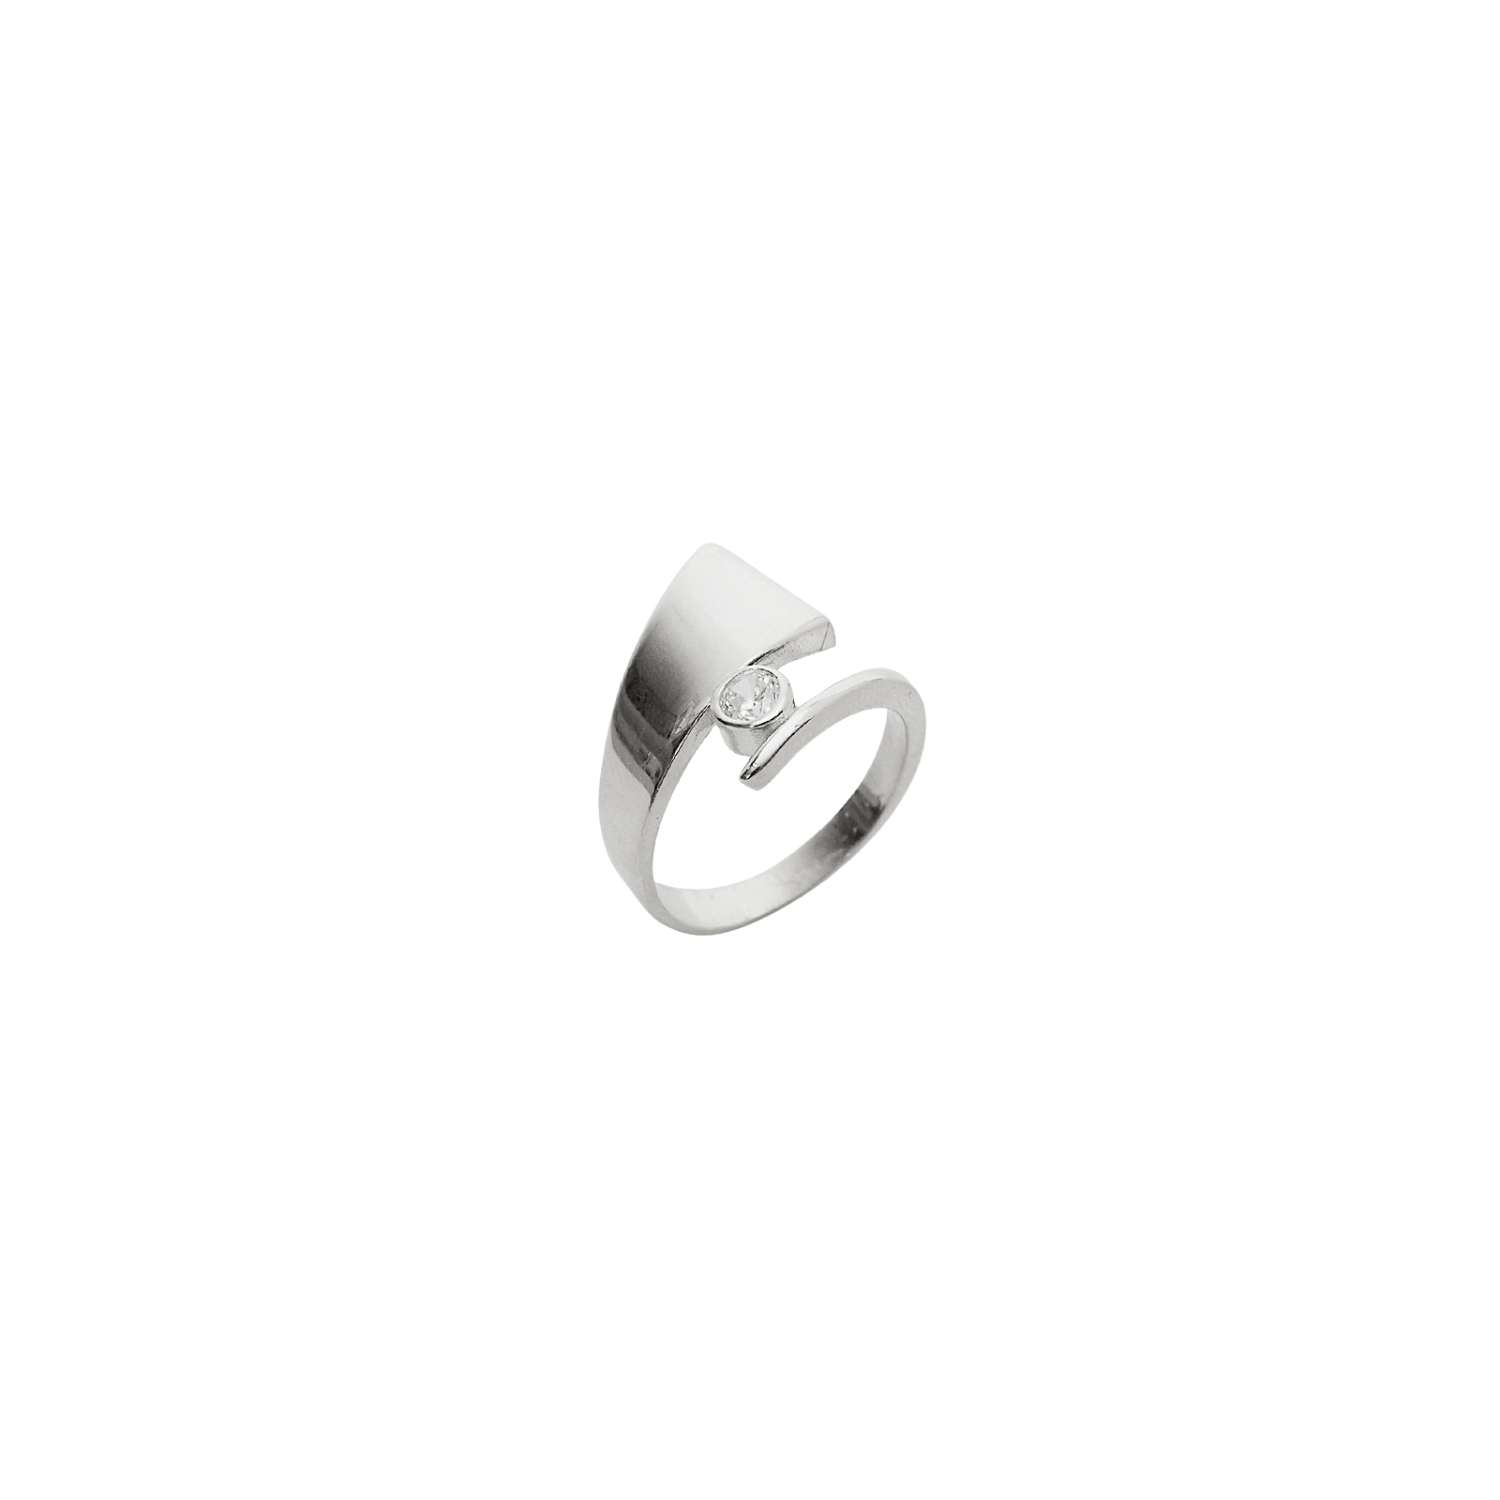 Spero London Women's Triangle Wrapping Sterling Silver Solitaire Ring - Silver In Metallic